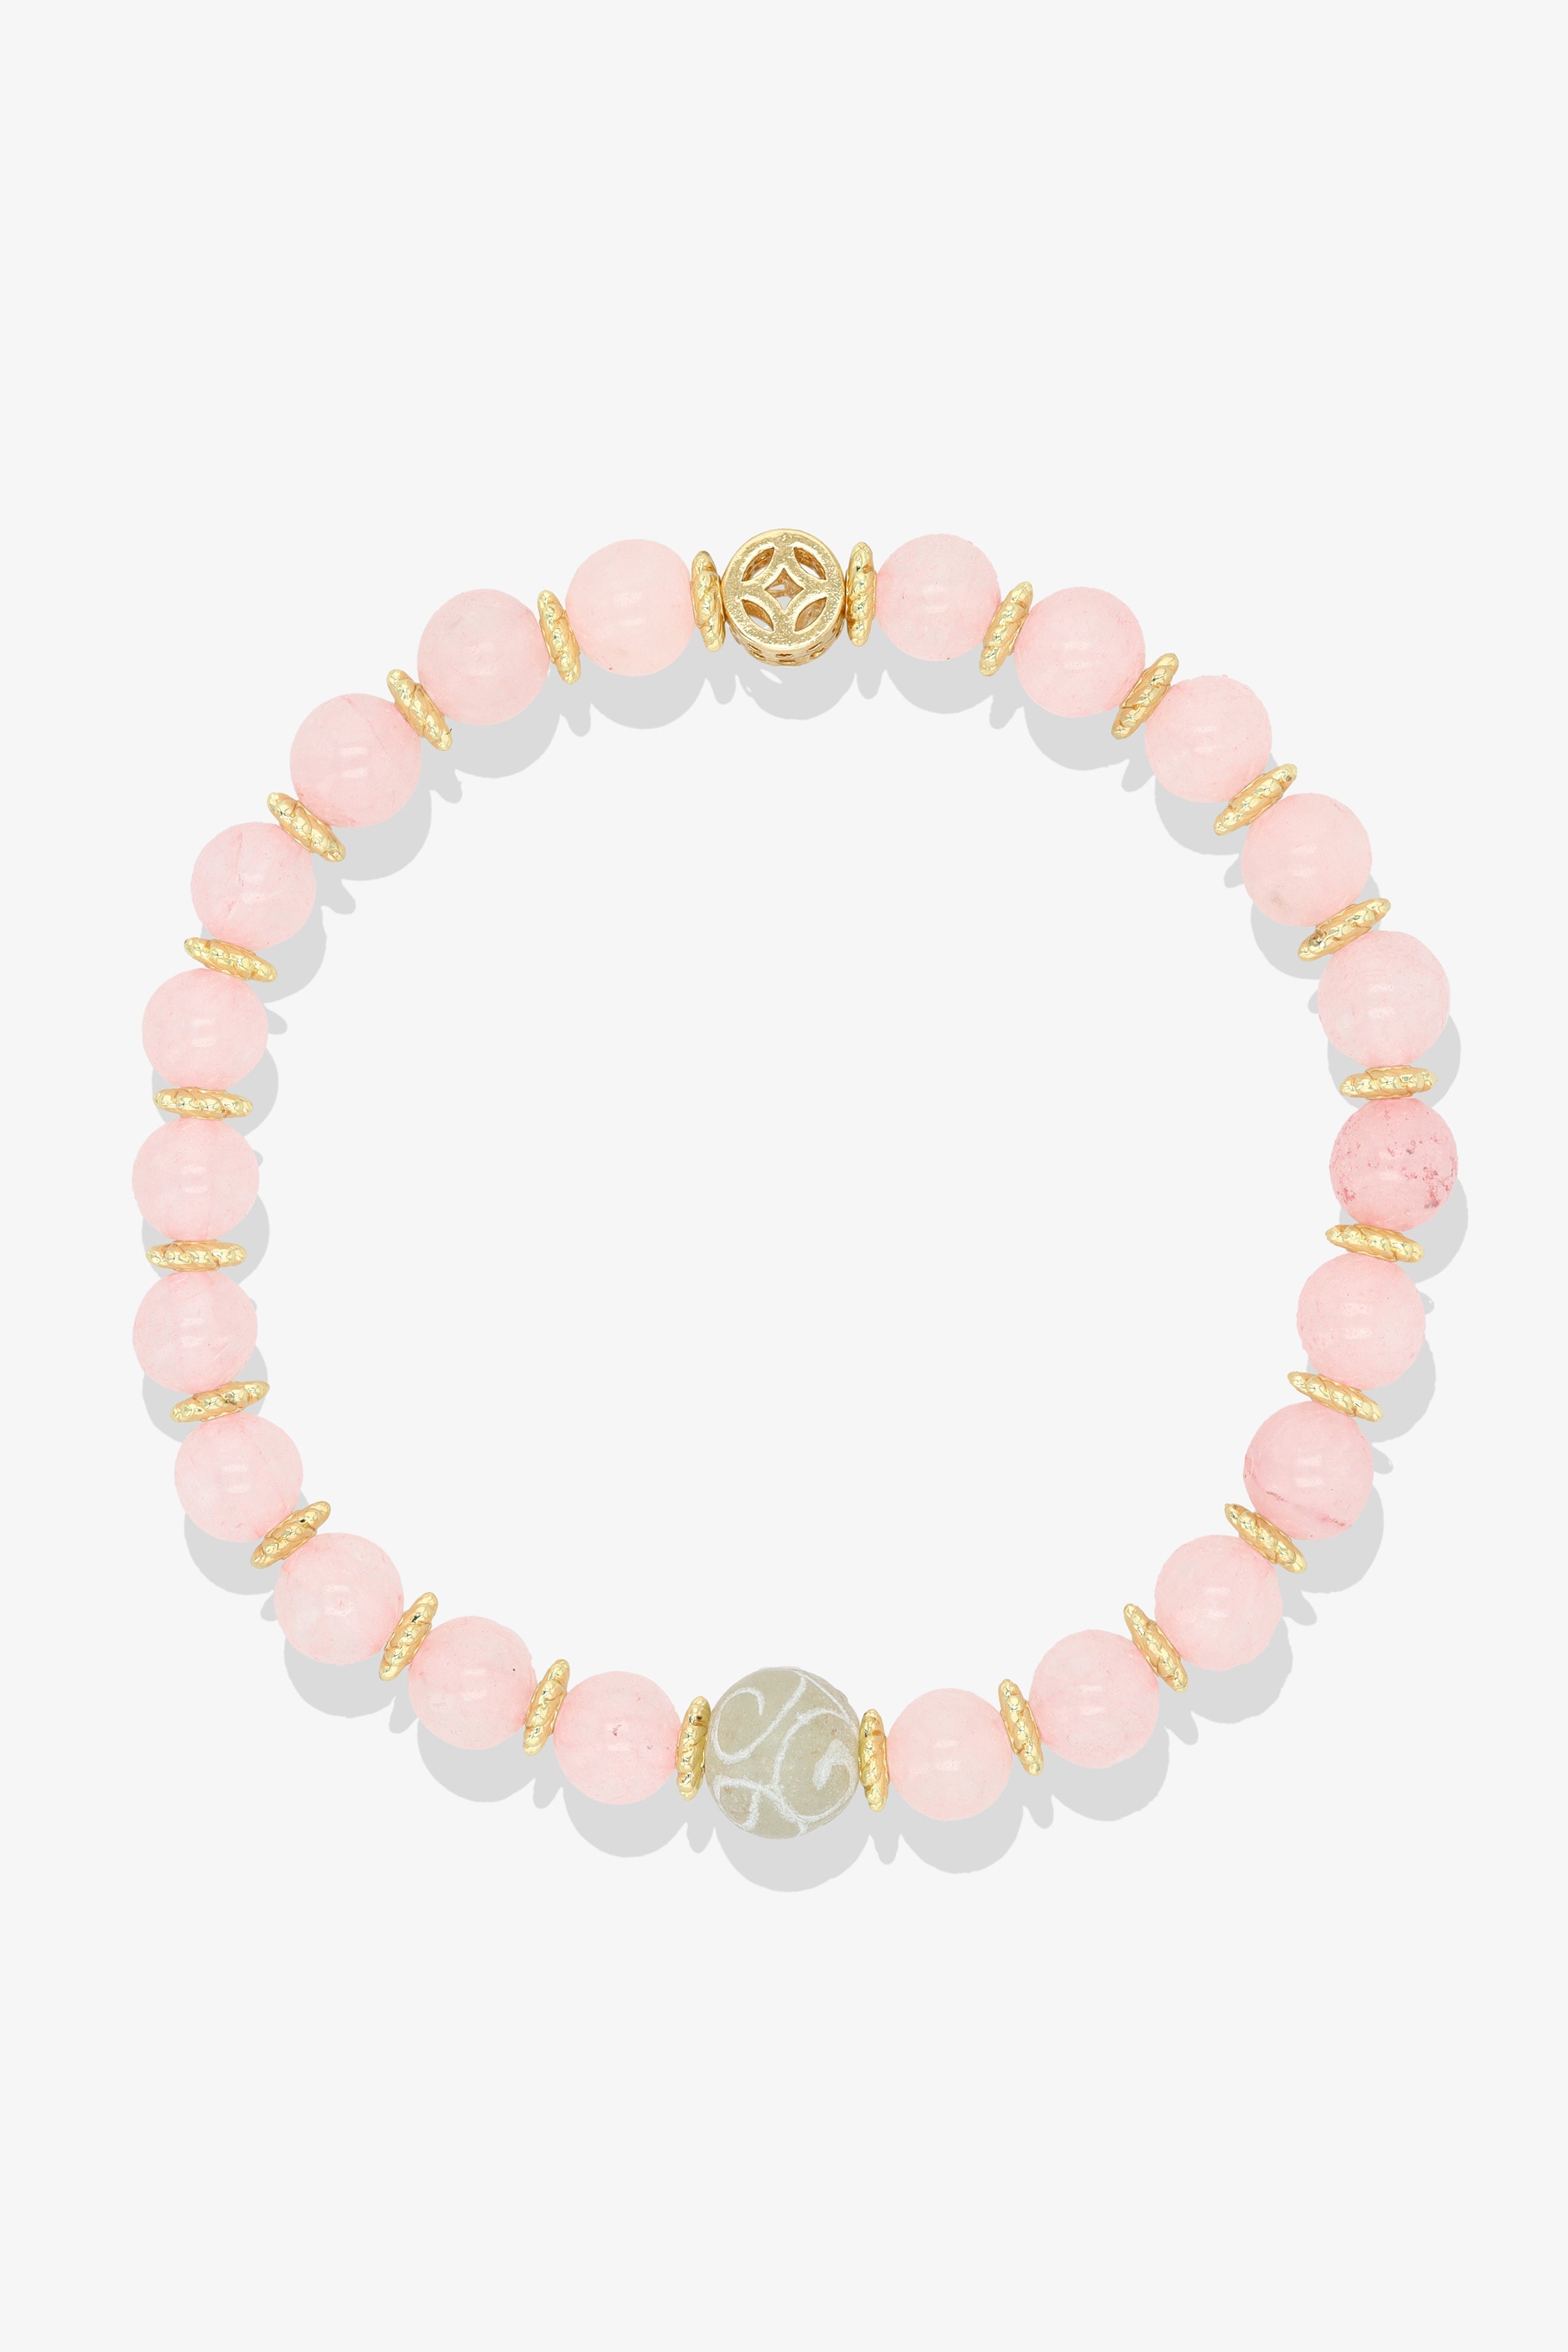 Rose Quartz with Gold Lucky Coin and White Jade charm Bracelet